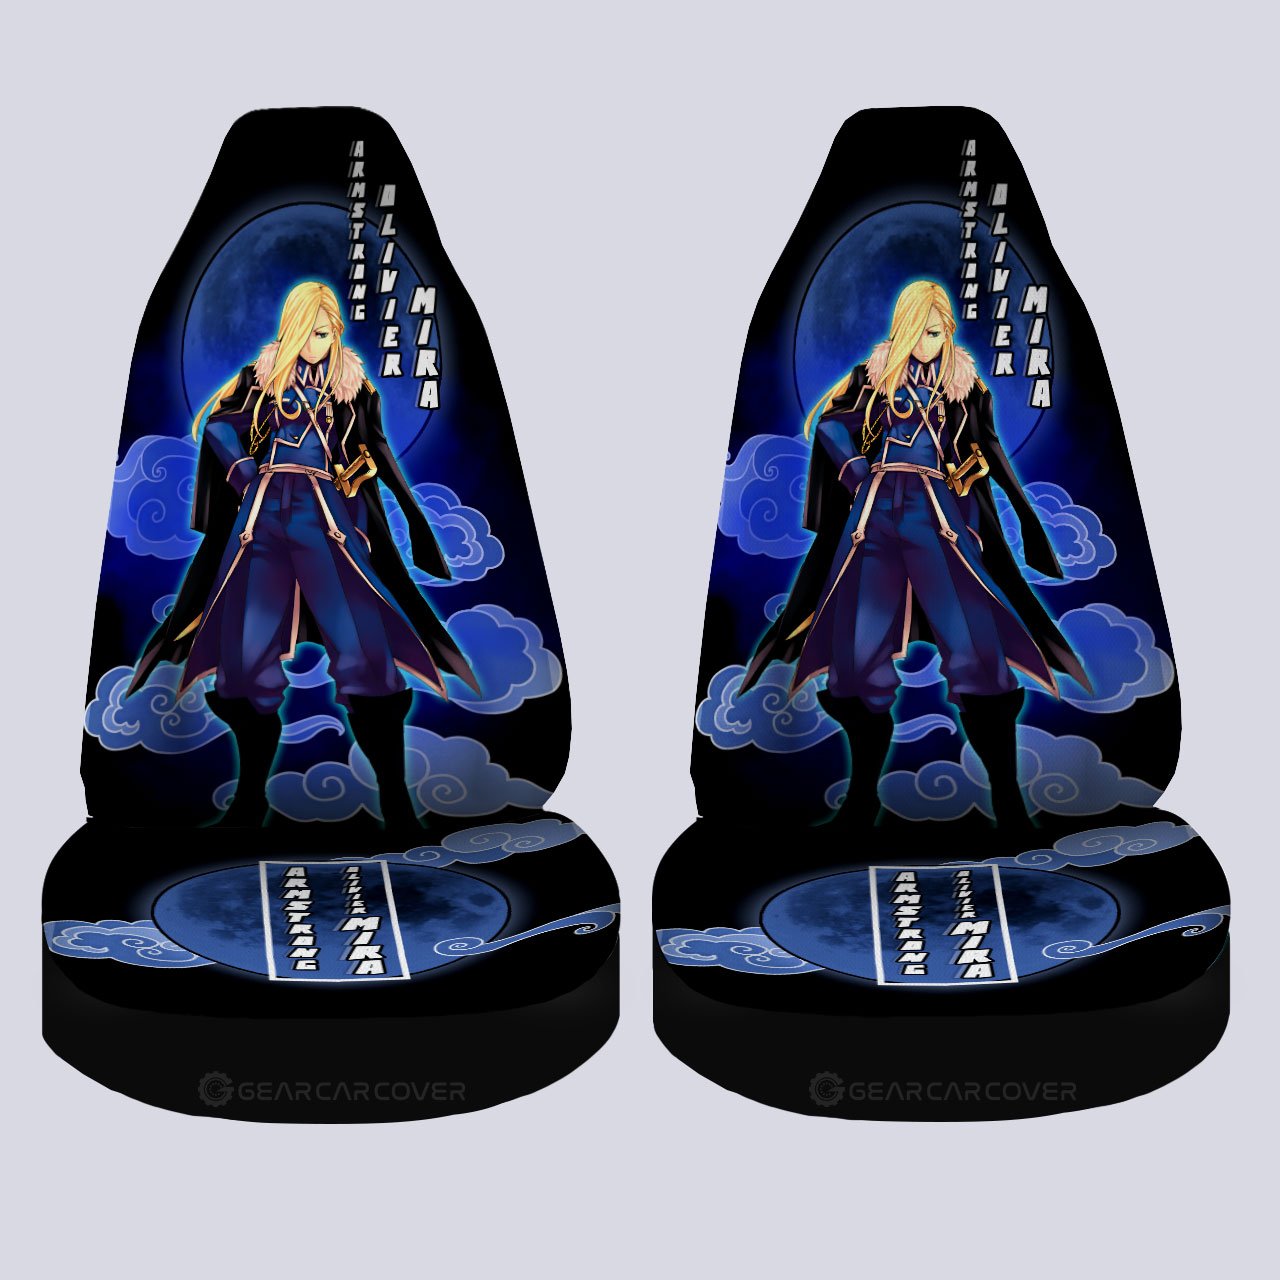 Olivier Mira Armstrong Car Seat Covers Custom Car Interior Accessories - Gearcarcover - 4